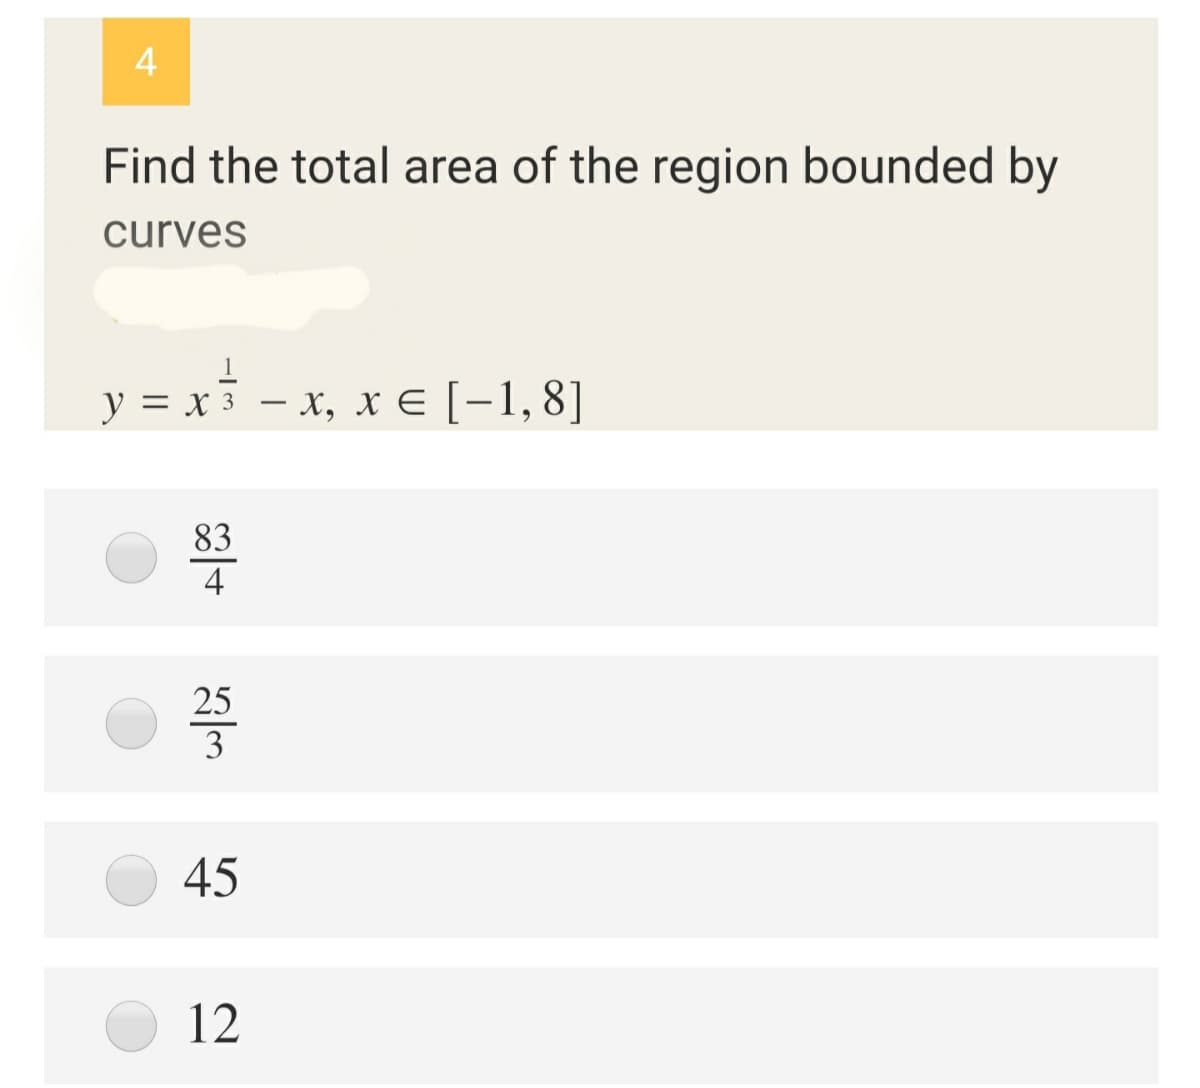 4
Find the total area of the region bounded by
curves
y = x 3 – x, x E [-1,8]
83
4
25
3
45
12
